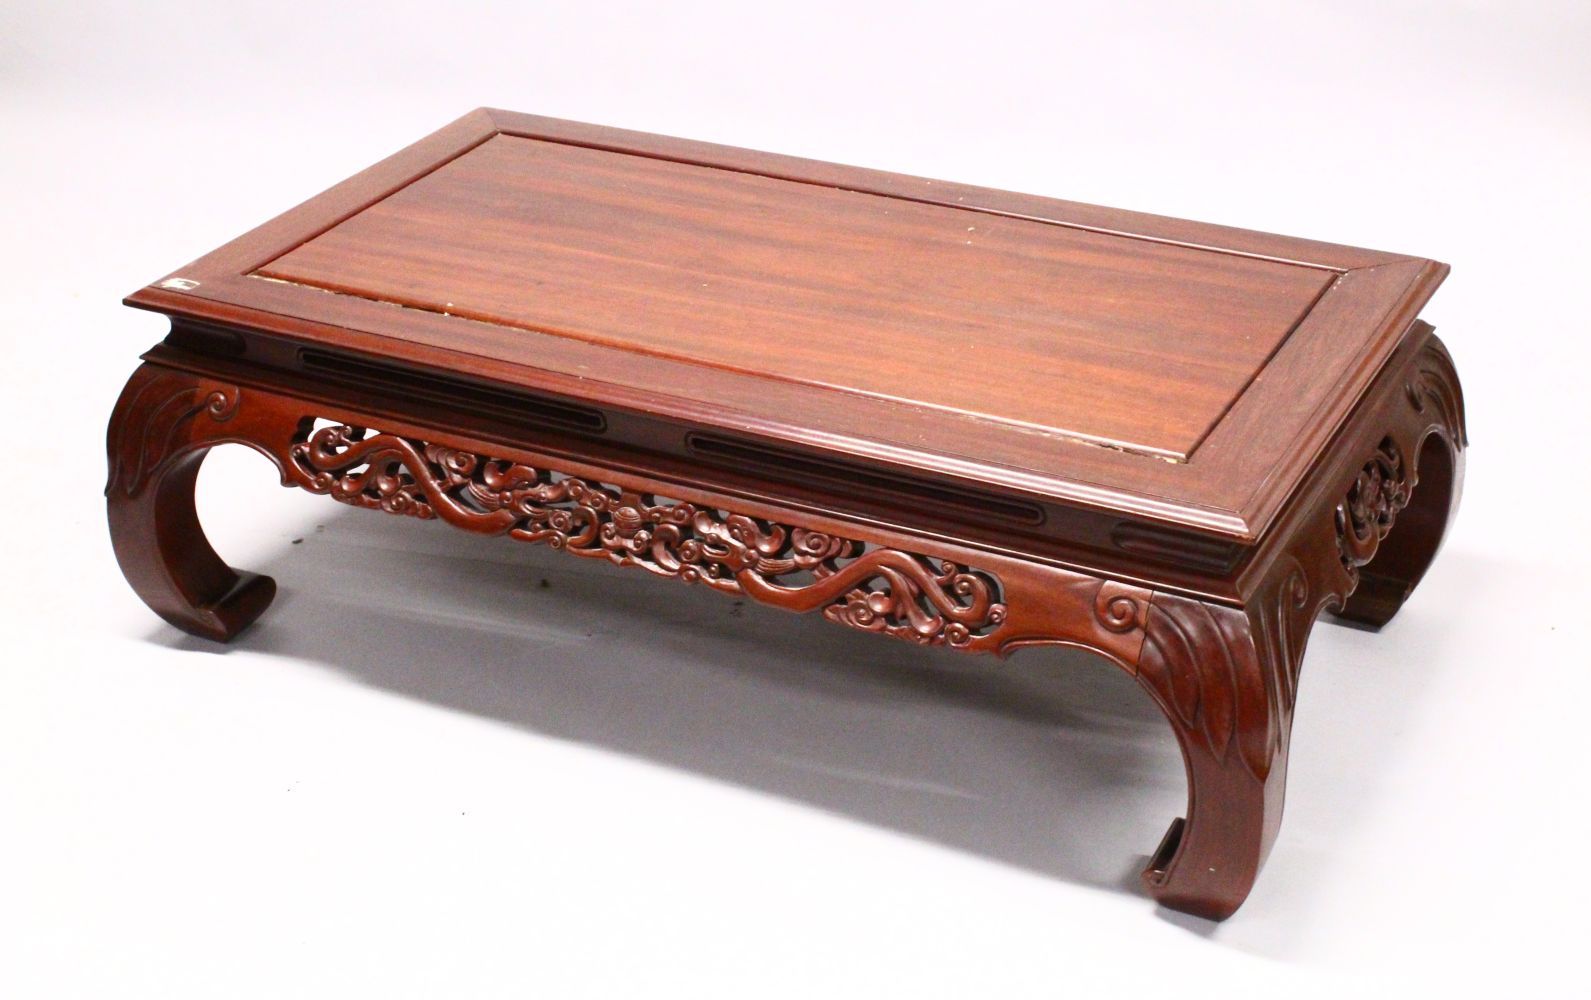 AN EARLY 20TH CENTURY CHINESE CARVED HARDWOOD COFFEE TABLE, with a carved frieze and curving legs,